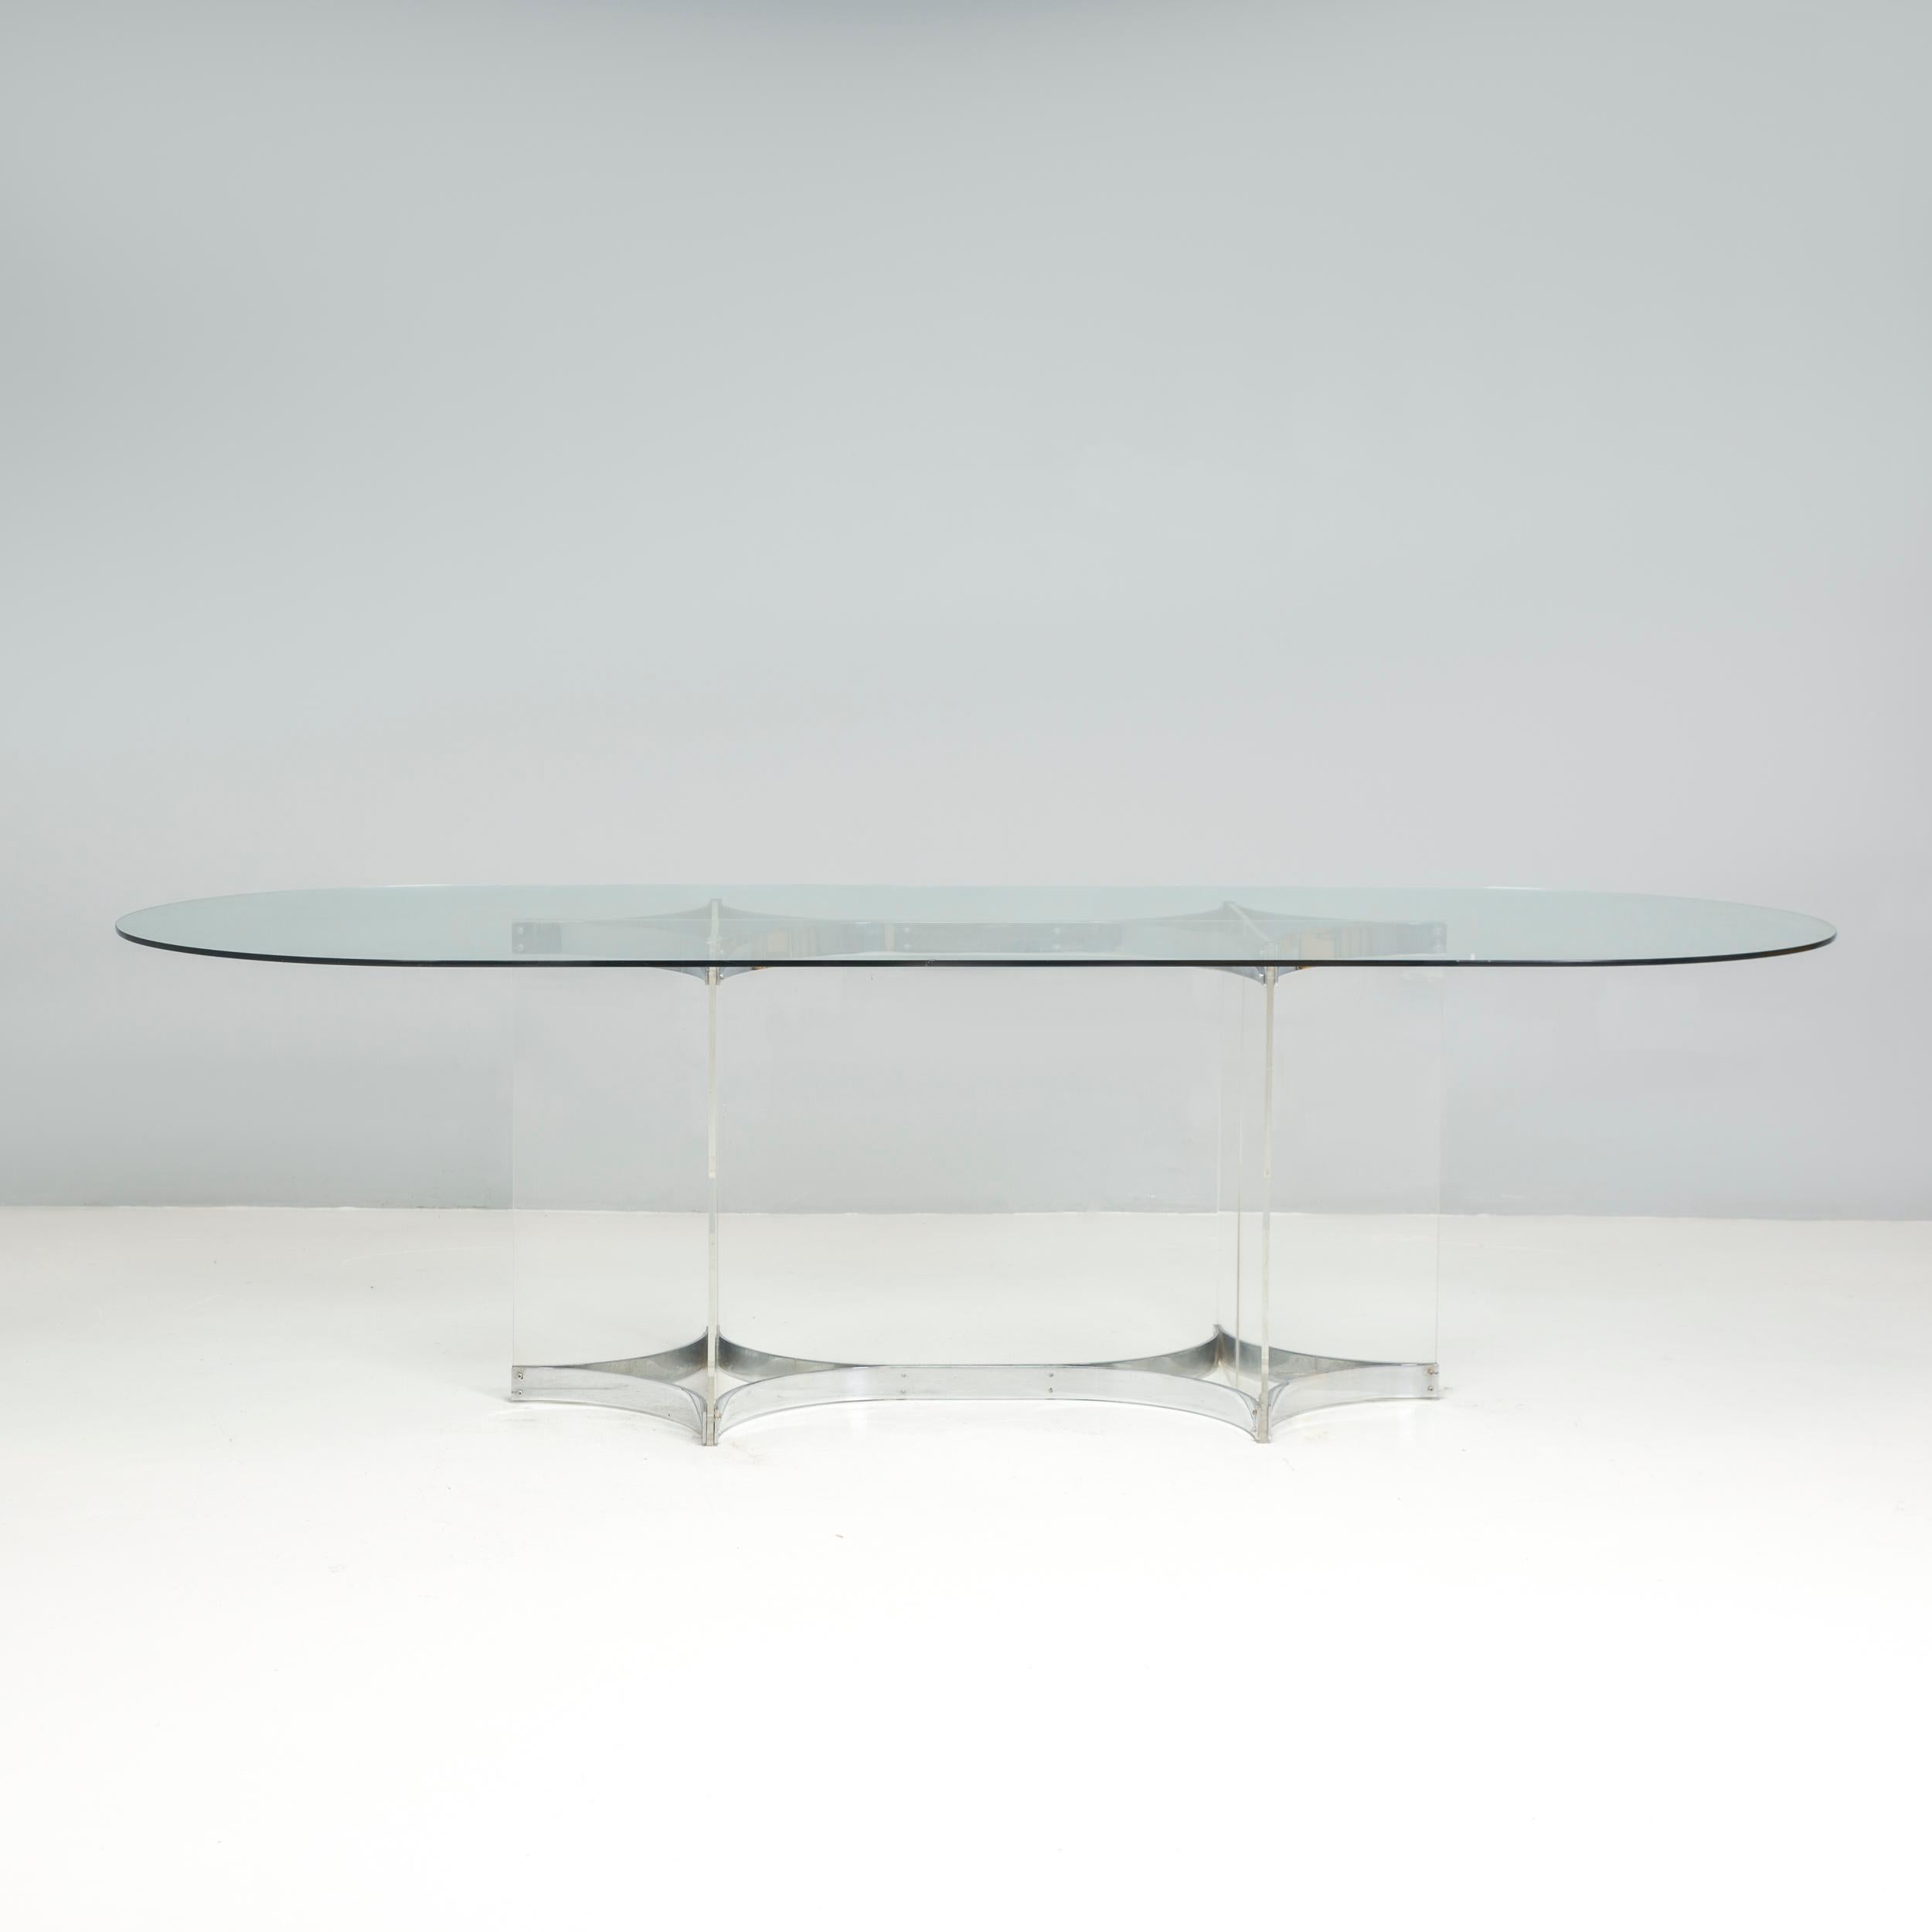 A remarkable Italian Mid Century Modern Coffee Table by Alessandro Albrizzi, finished in chrome plated steel with sculptural curved shapes supporting interlocking acrylic glass sheets. 

Highly decorative heavy and sturdy base ready. The sculptural